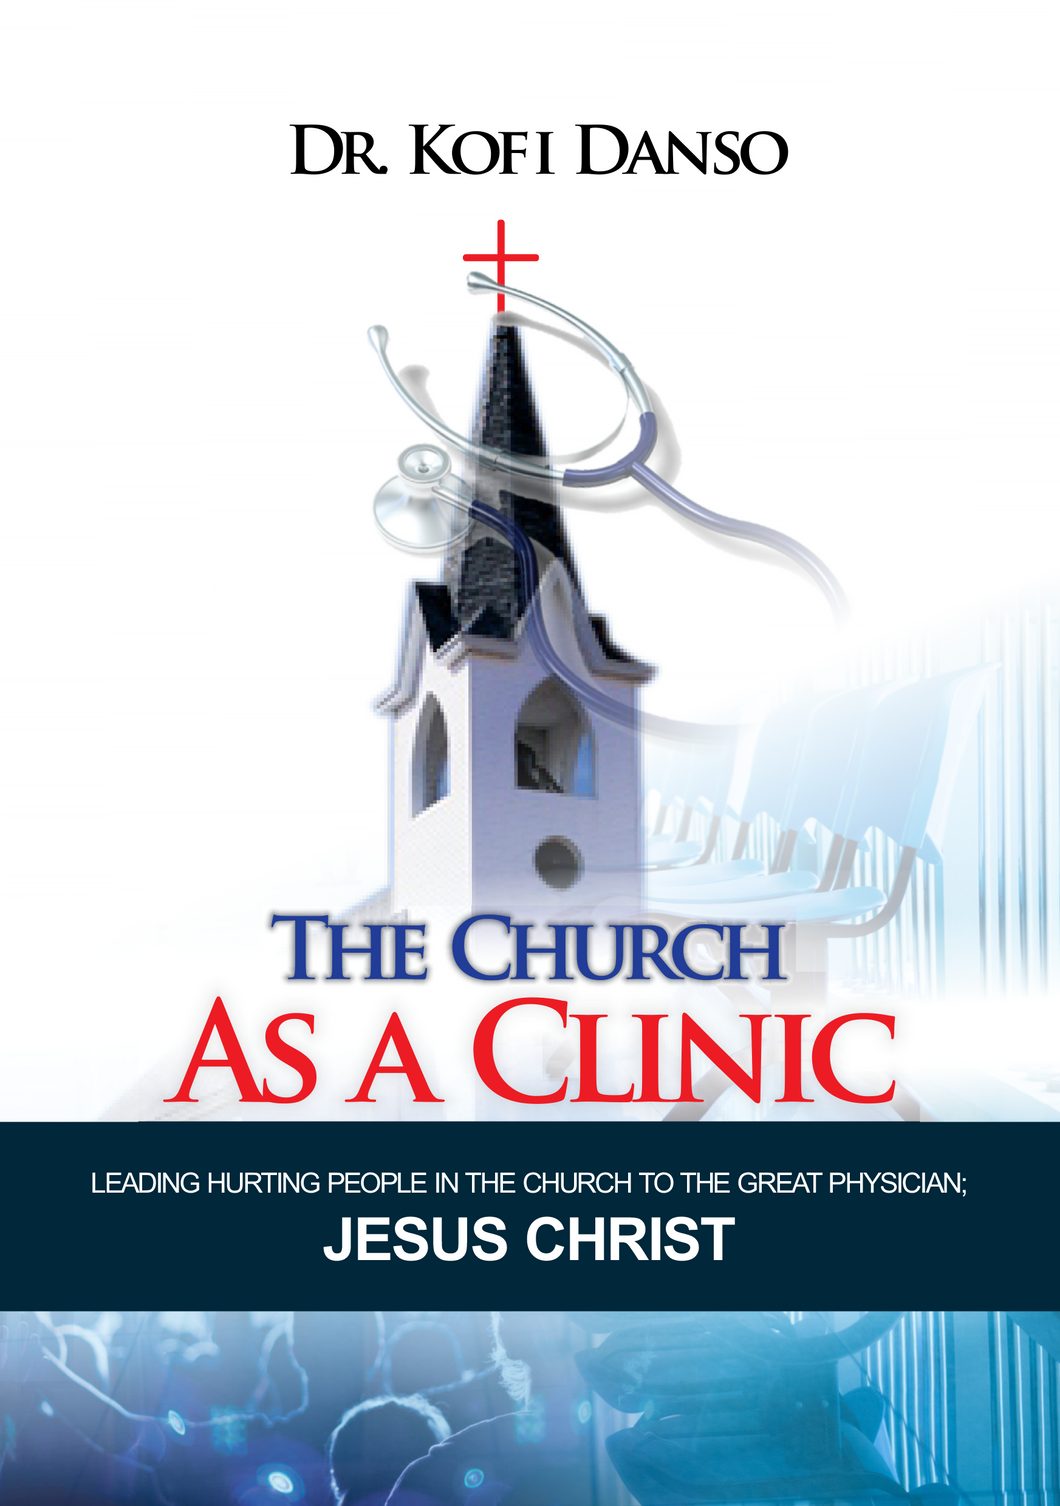 #DD - The Church As A Clinic: Leading Hurting People In The Church To The Great Physician, Jesus Christ (Ebook) - Miracle Arena Bookstore